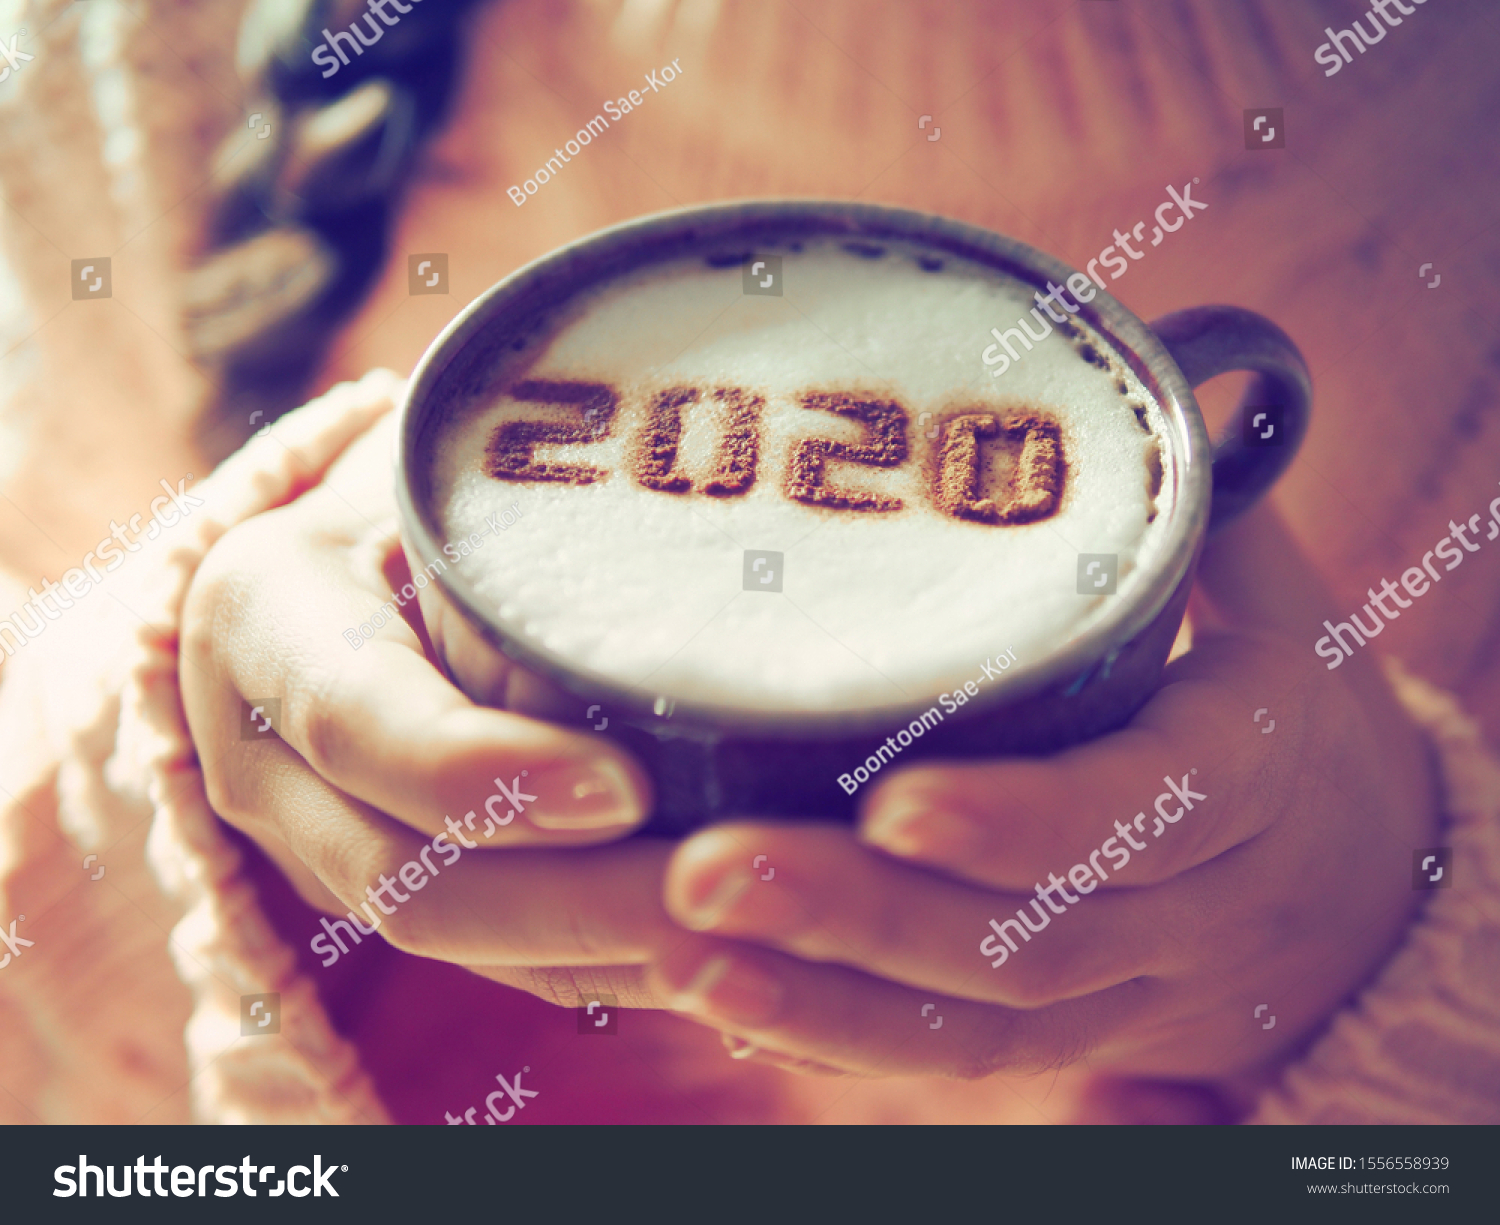 Number 2020 on frothy surface of cappuccino served in white cup holding by female hands with French nail polish. Food art creative concept for active days in New Year 2020. (close up, selective focus) #1556558939